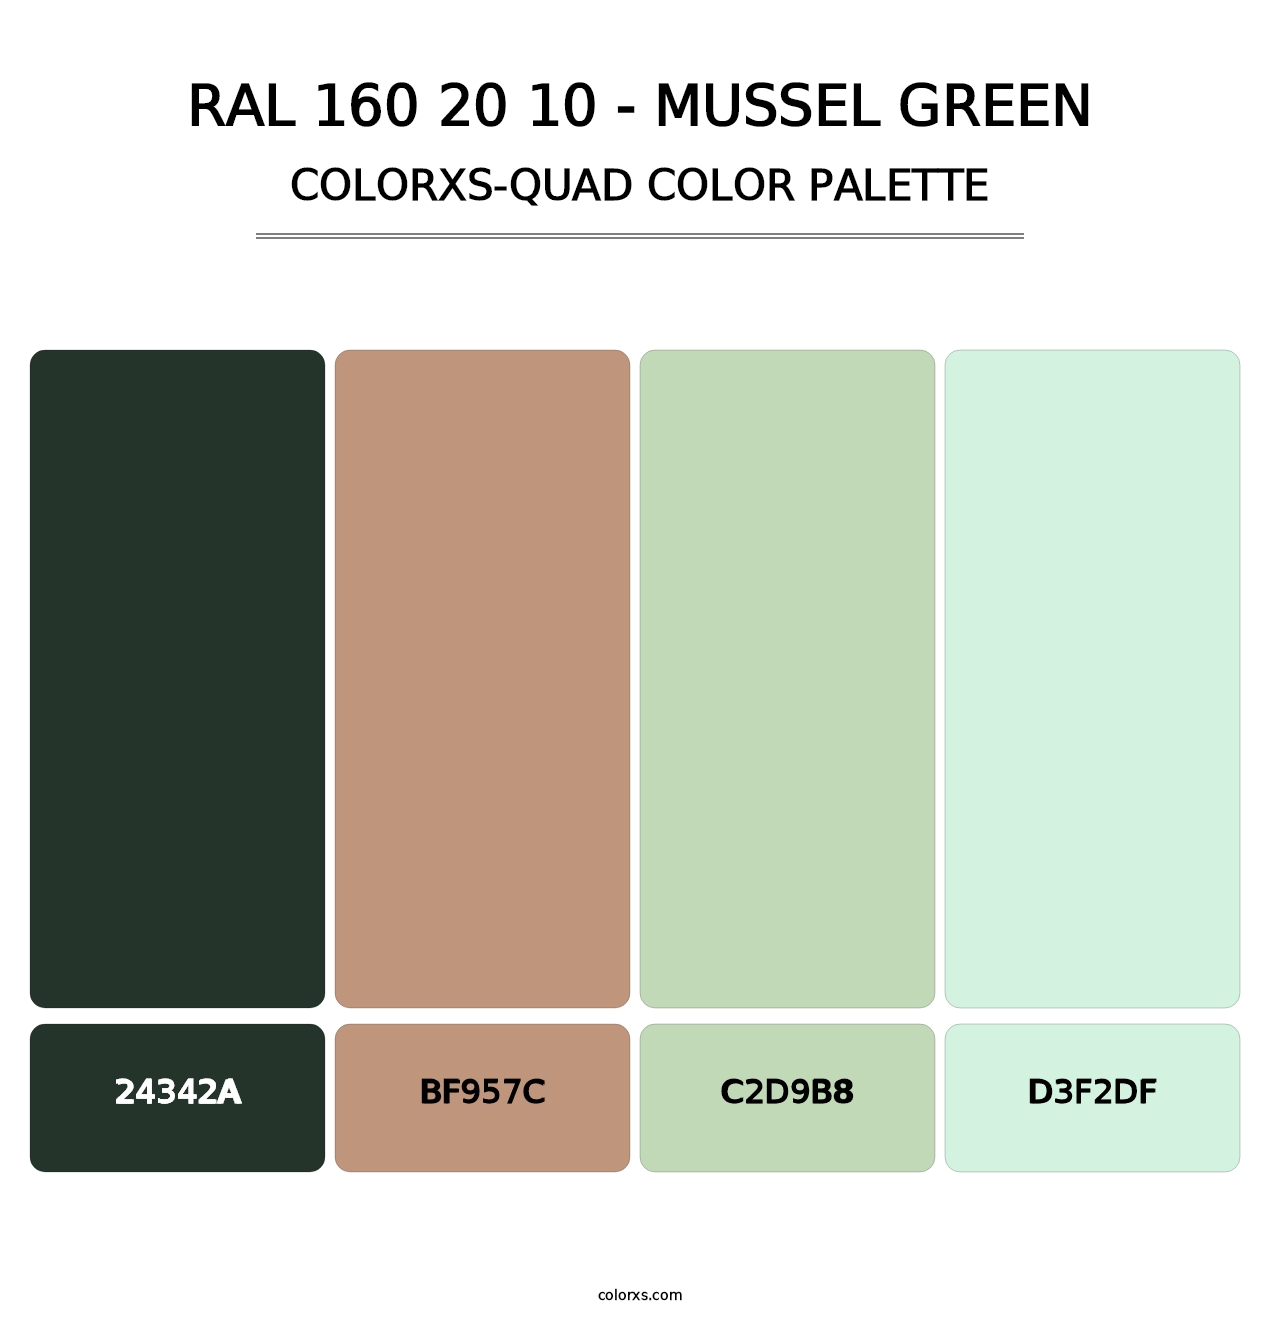 RAL 160 20 10 - Mussel Green - Colorxs Quad Palette